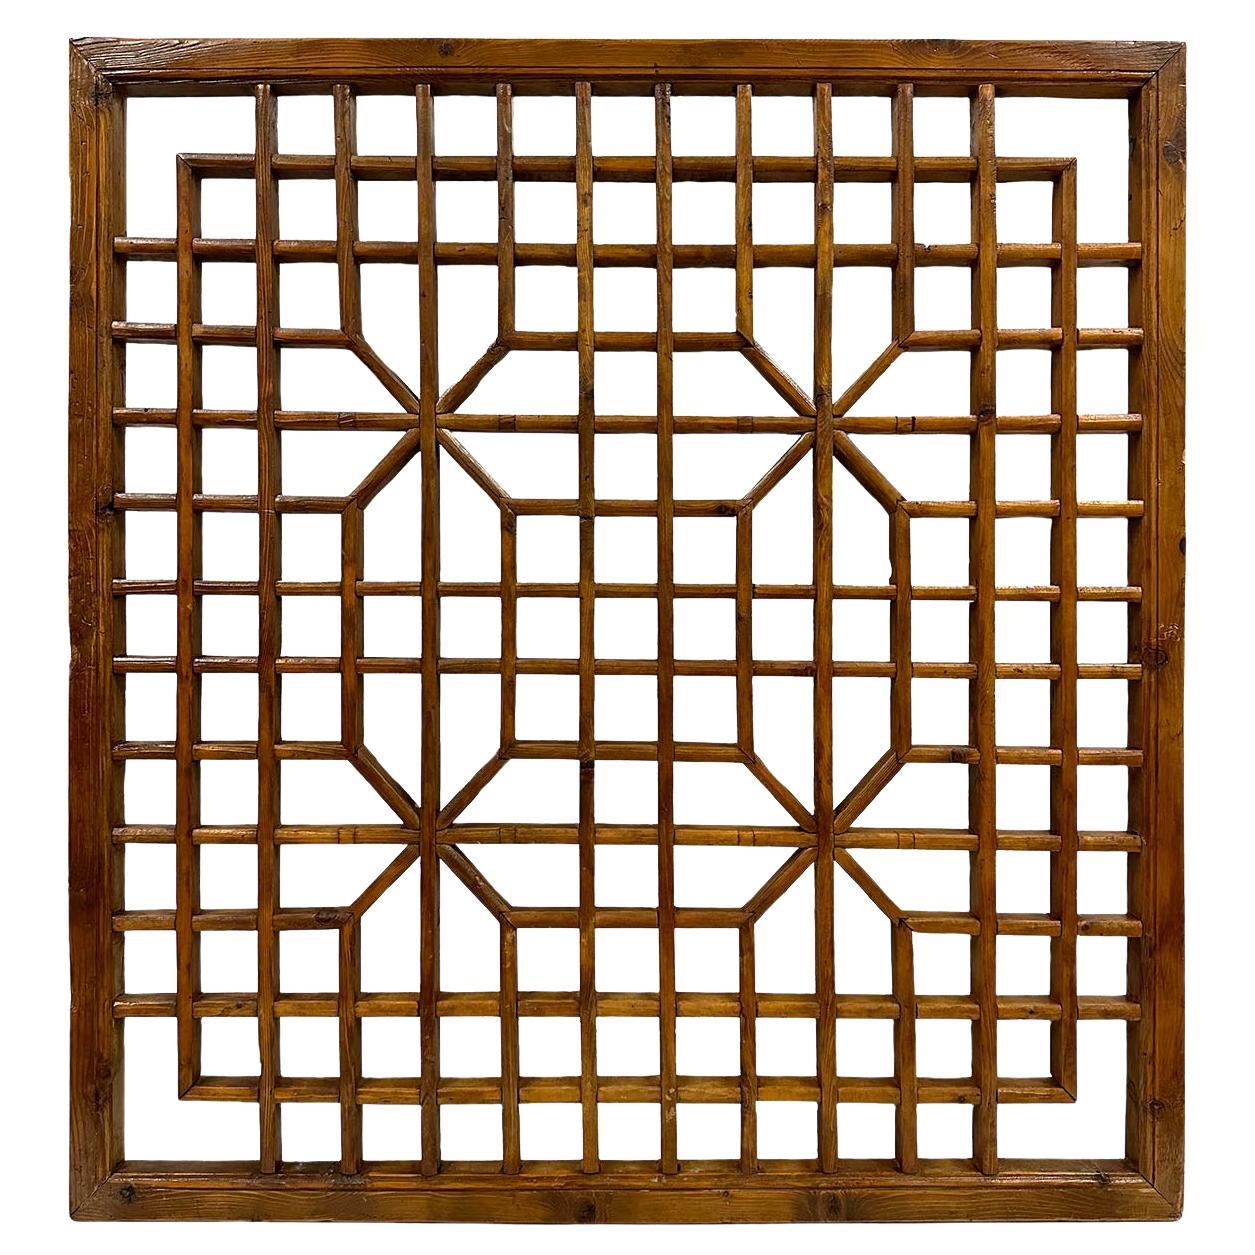 19th Century Antique Chinese Carved Wooden Window Panel/Wall Arts